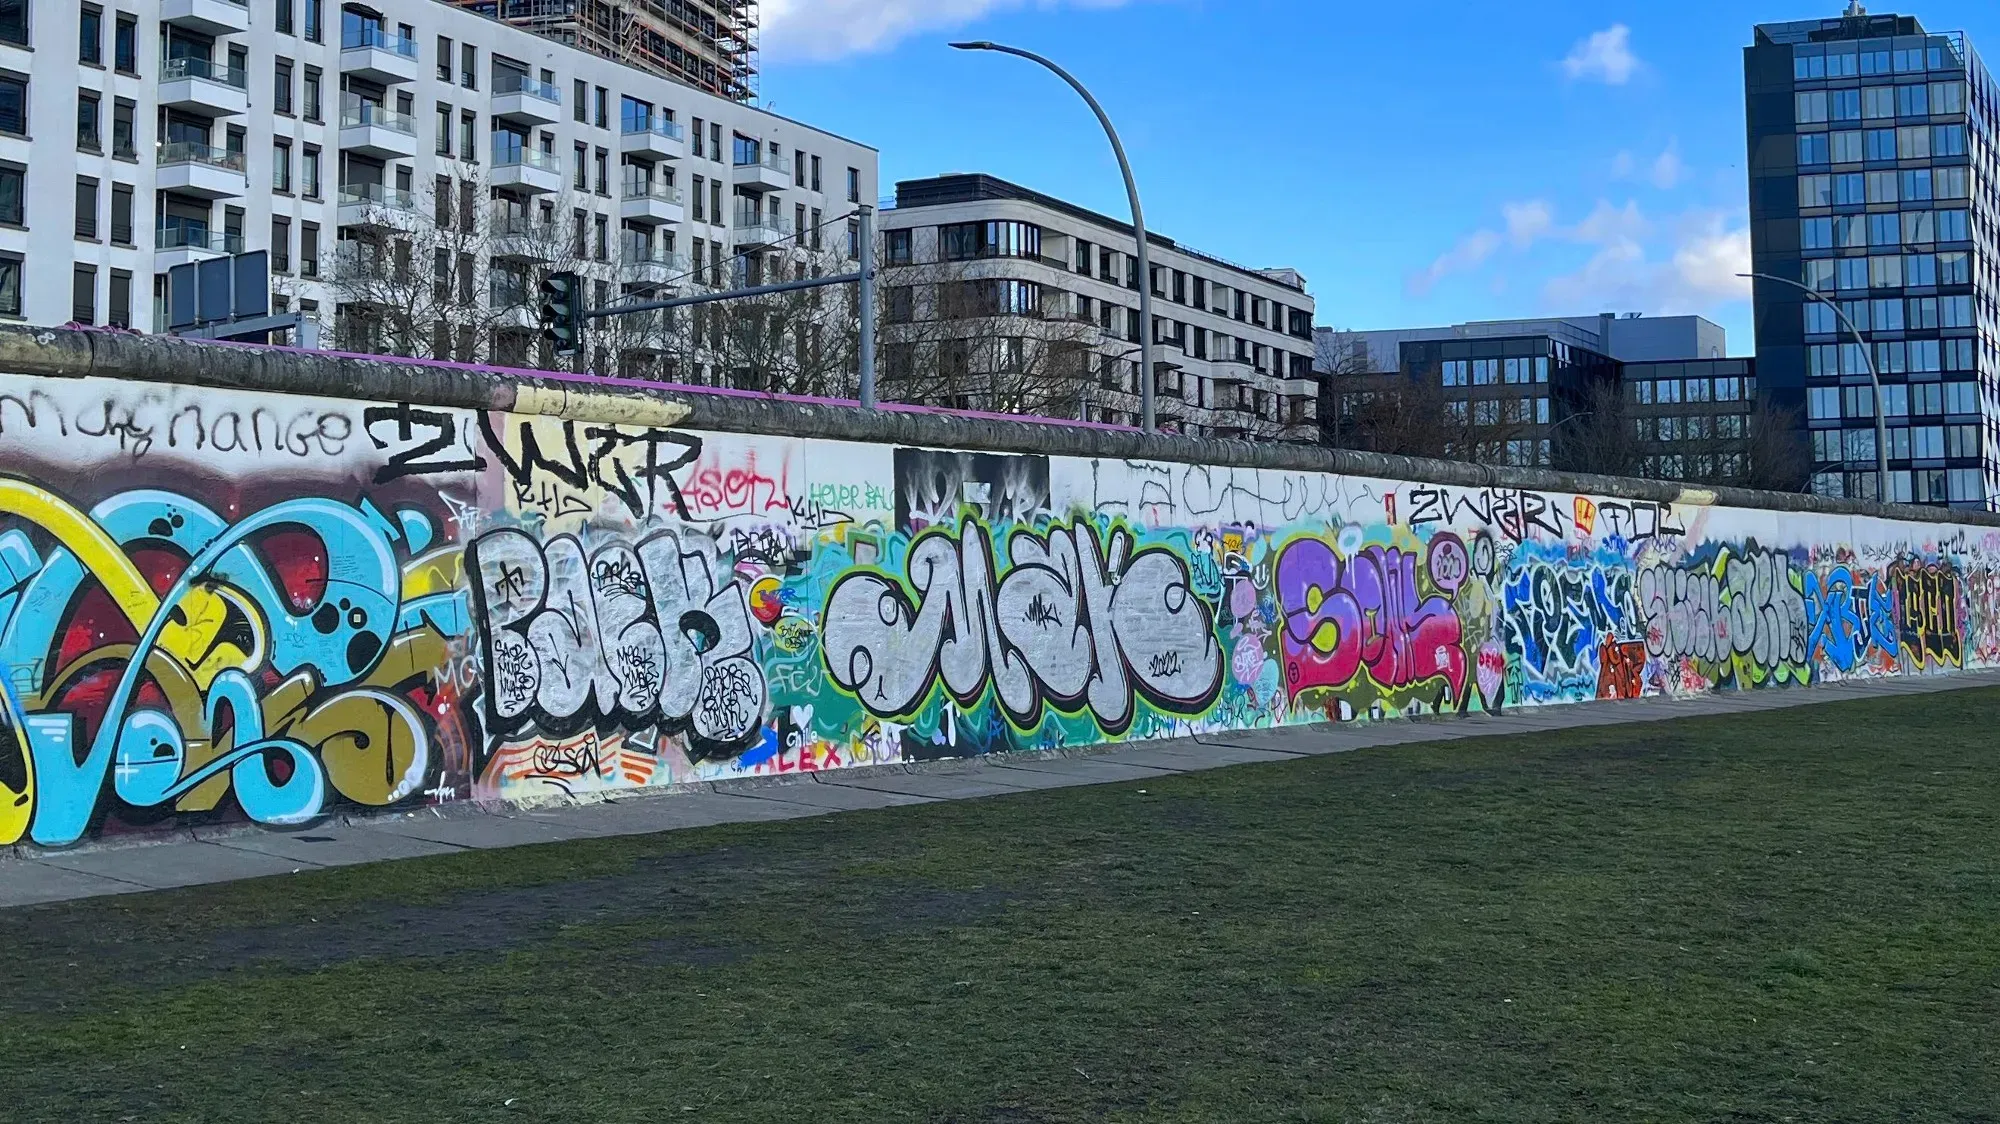 Stretch of the Berlin Wall covered in graffiti